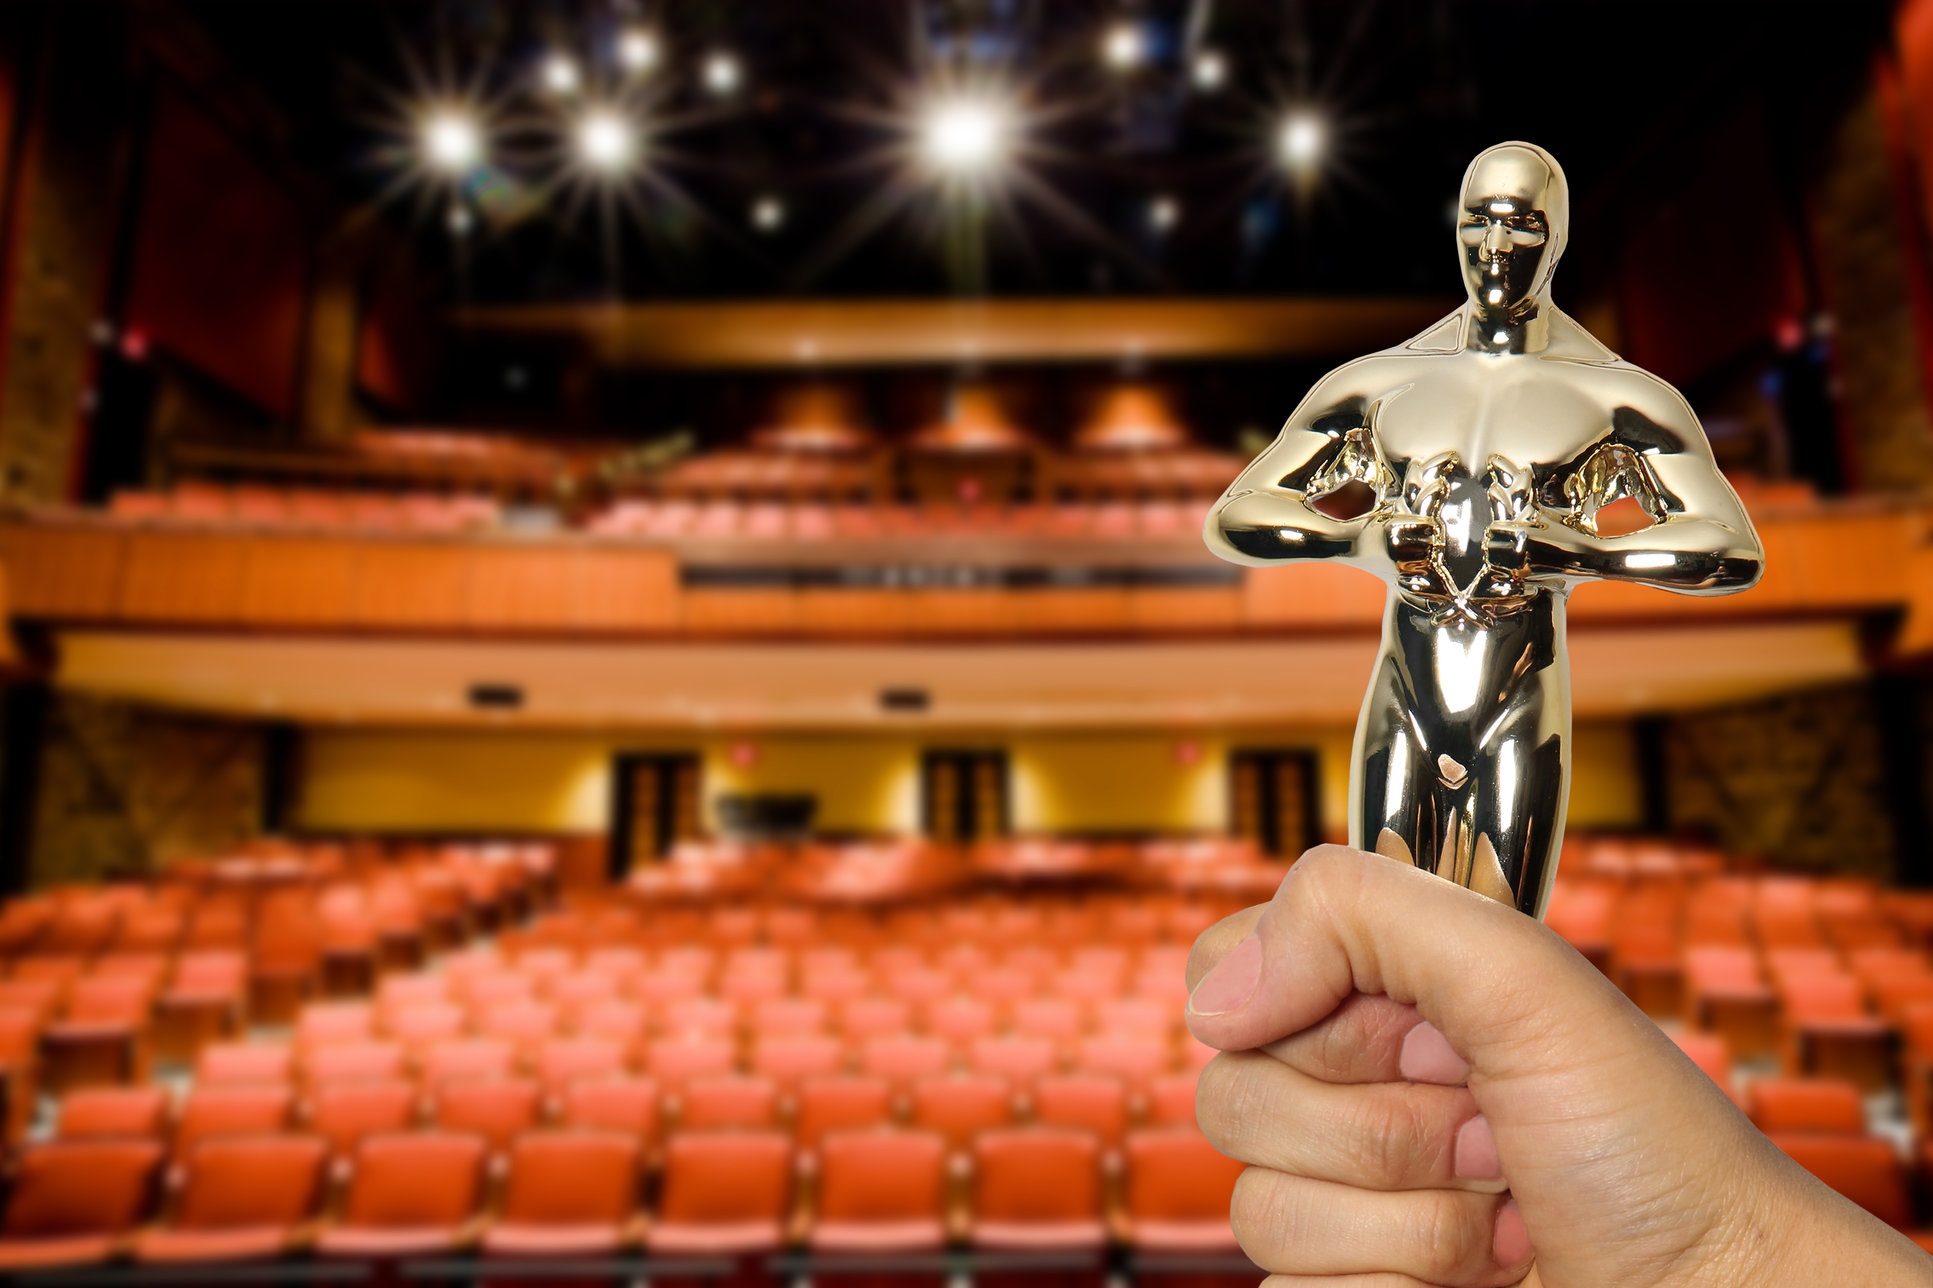 Is Your Website Oscar Worthy or a B-Movie Dud? 6 Things Every Website Should Include to be Great